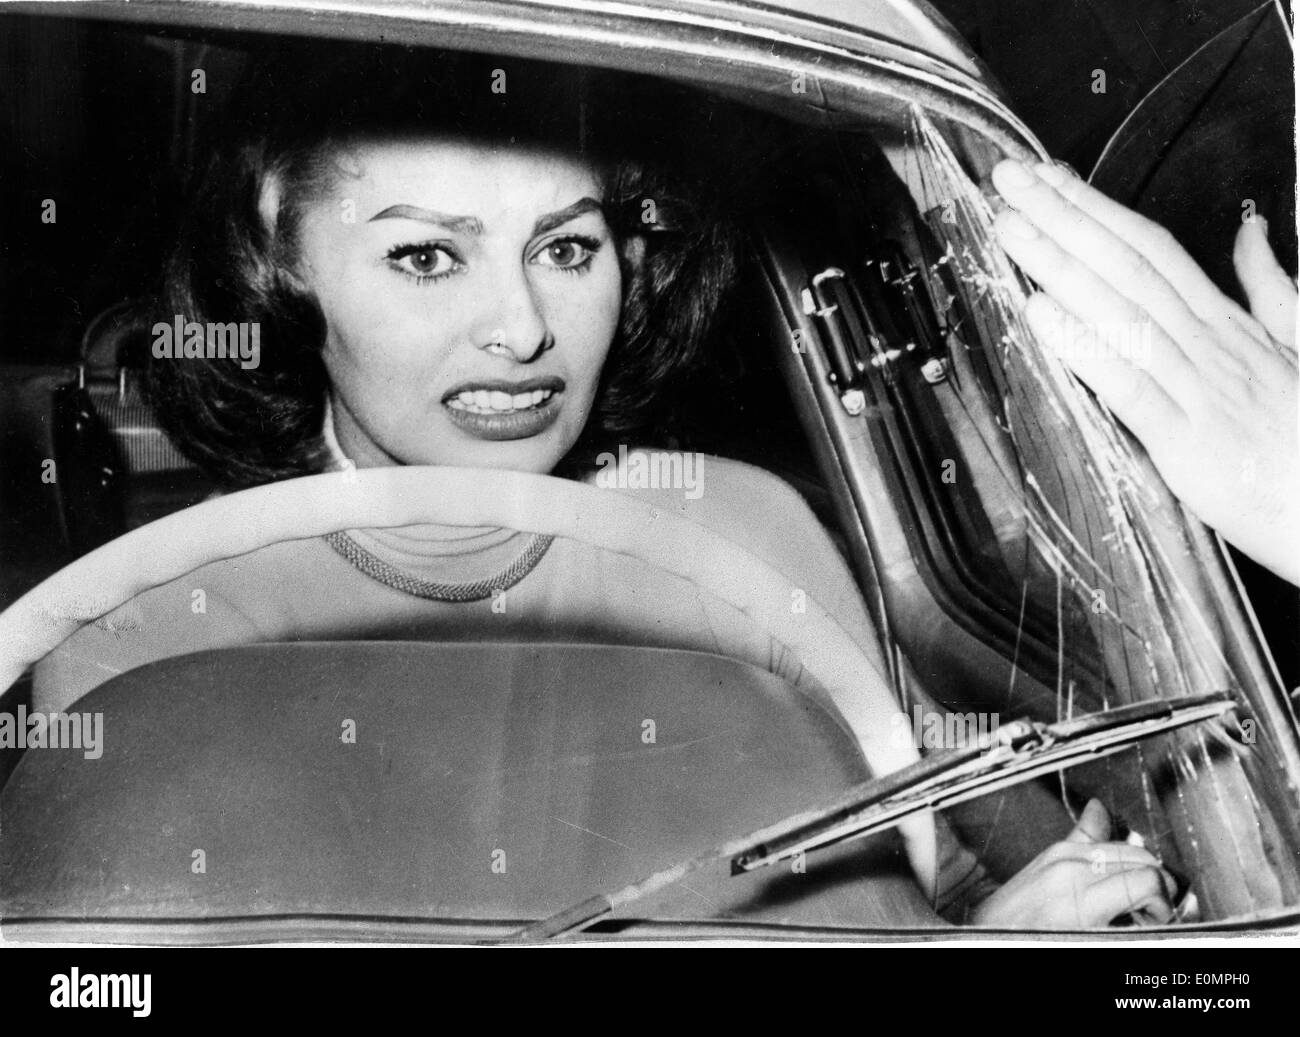 Actress Sophia Loren frightened after her windshield was cracked Stock Photo